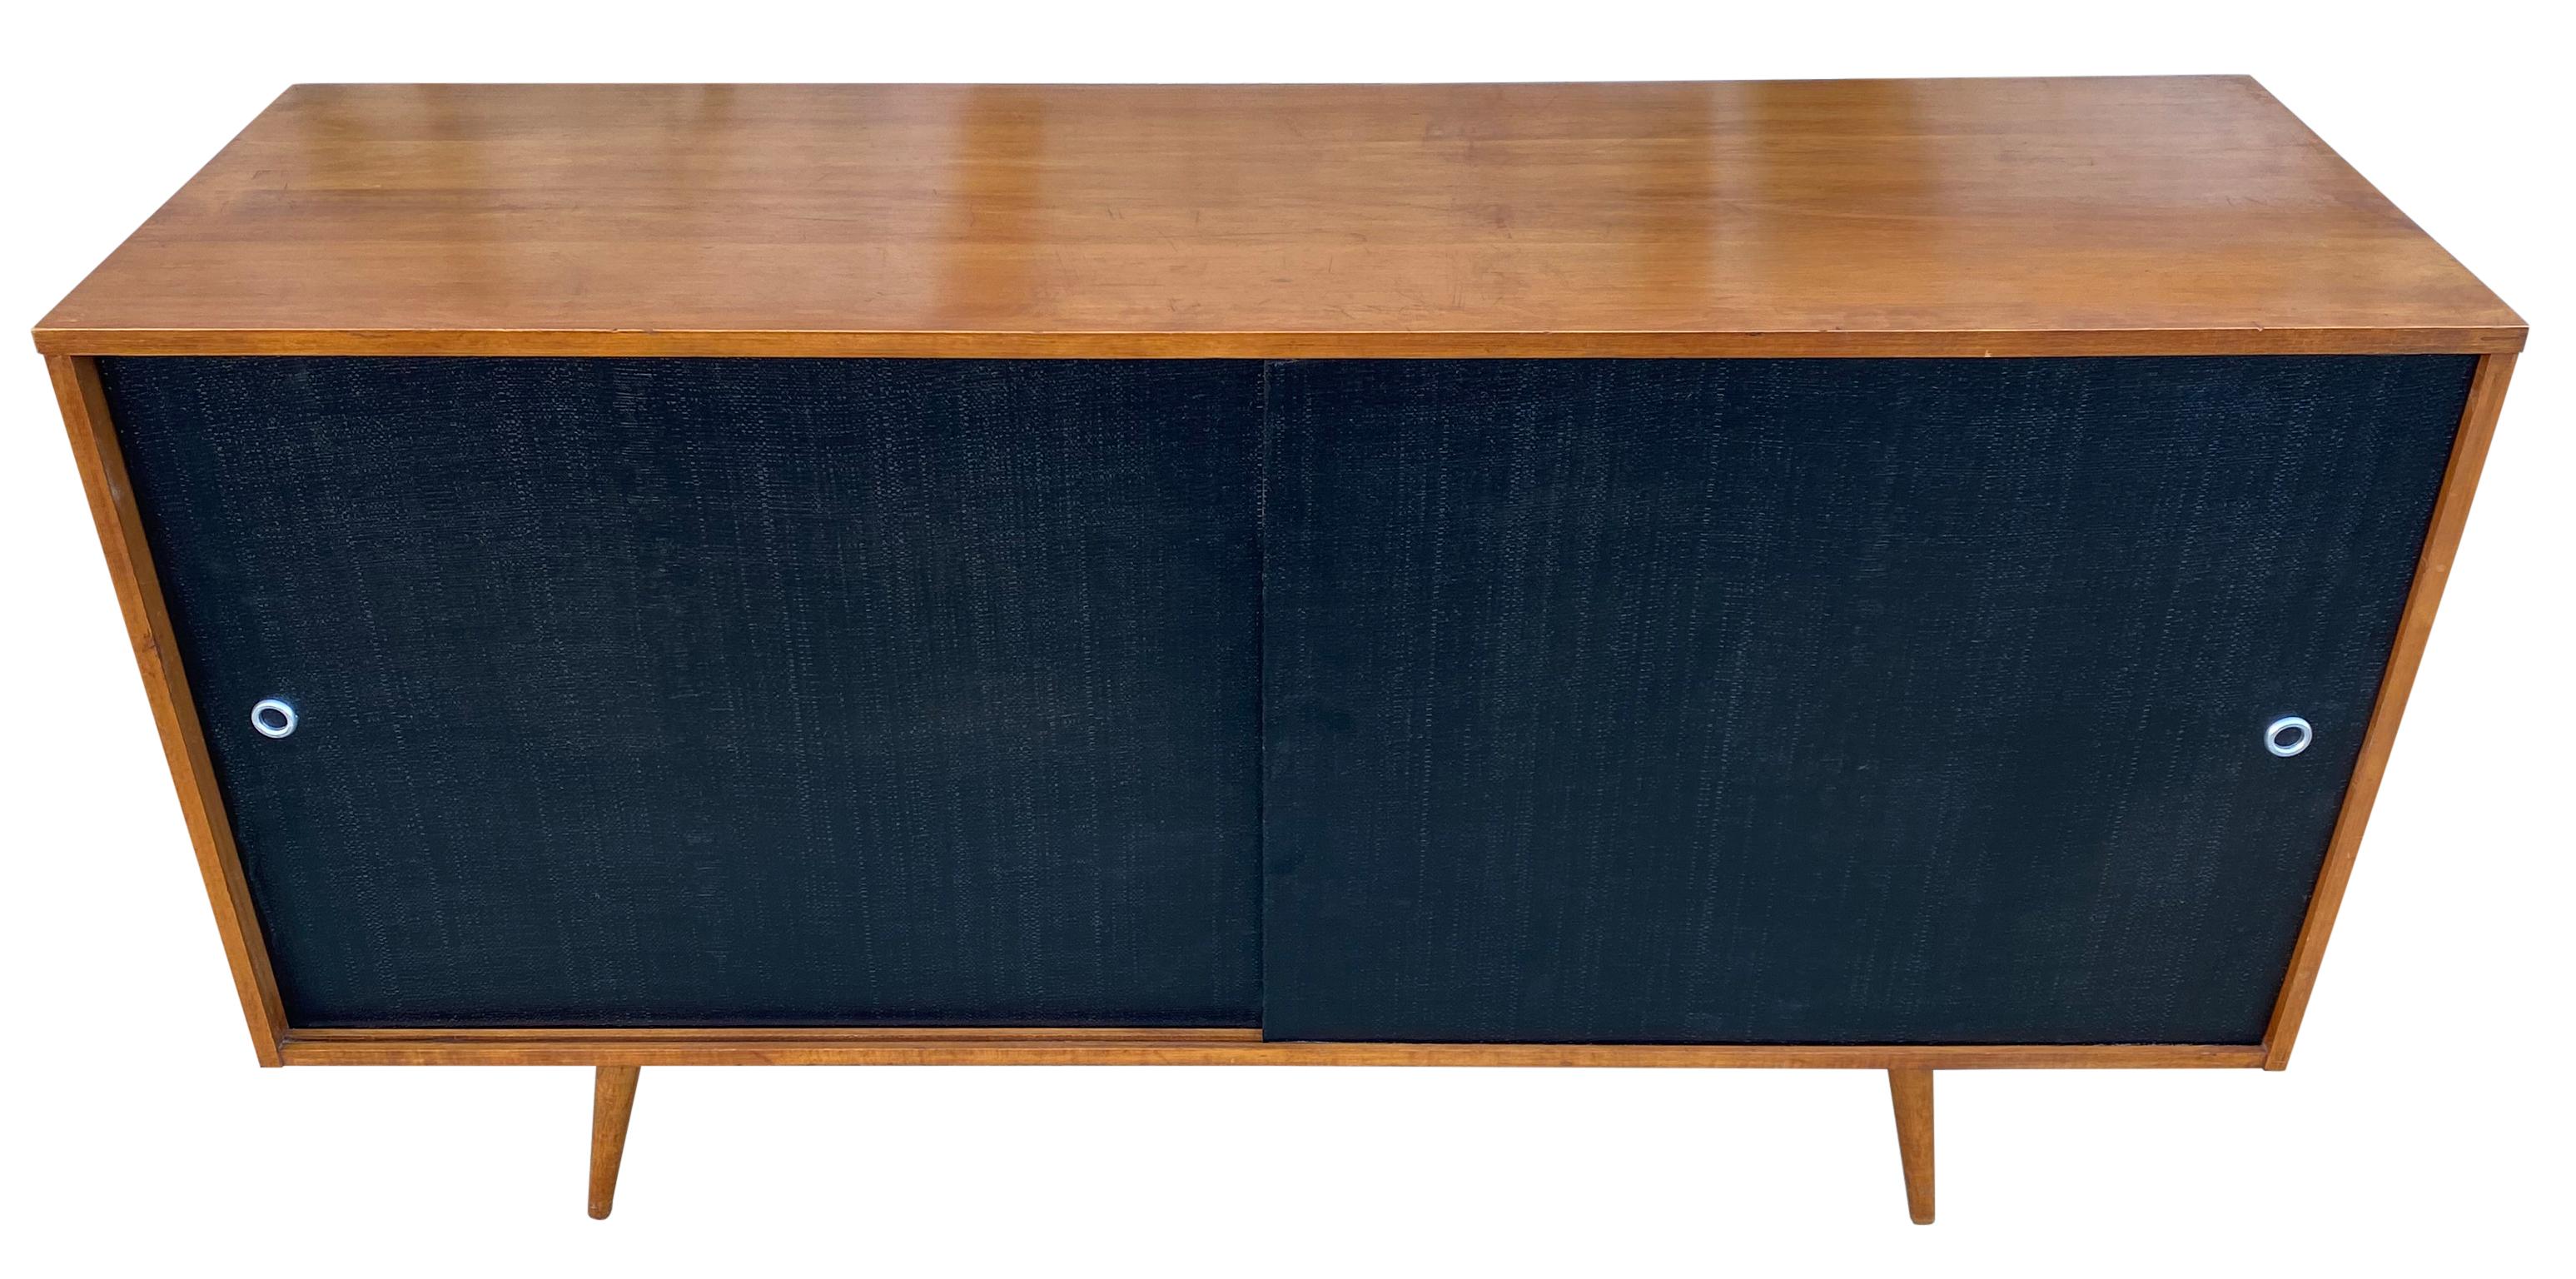 Beautiful midcentury credenza by Paul McCobb circa 1950 Planner Group #1514 has 1 adjustable shelves with pins with 1 drawer on the left side and 3 drawers on the right side. Solid maple construction has a Tobacco maple finish. All original black